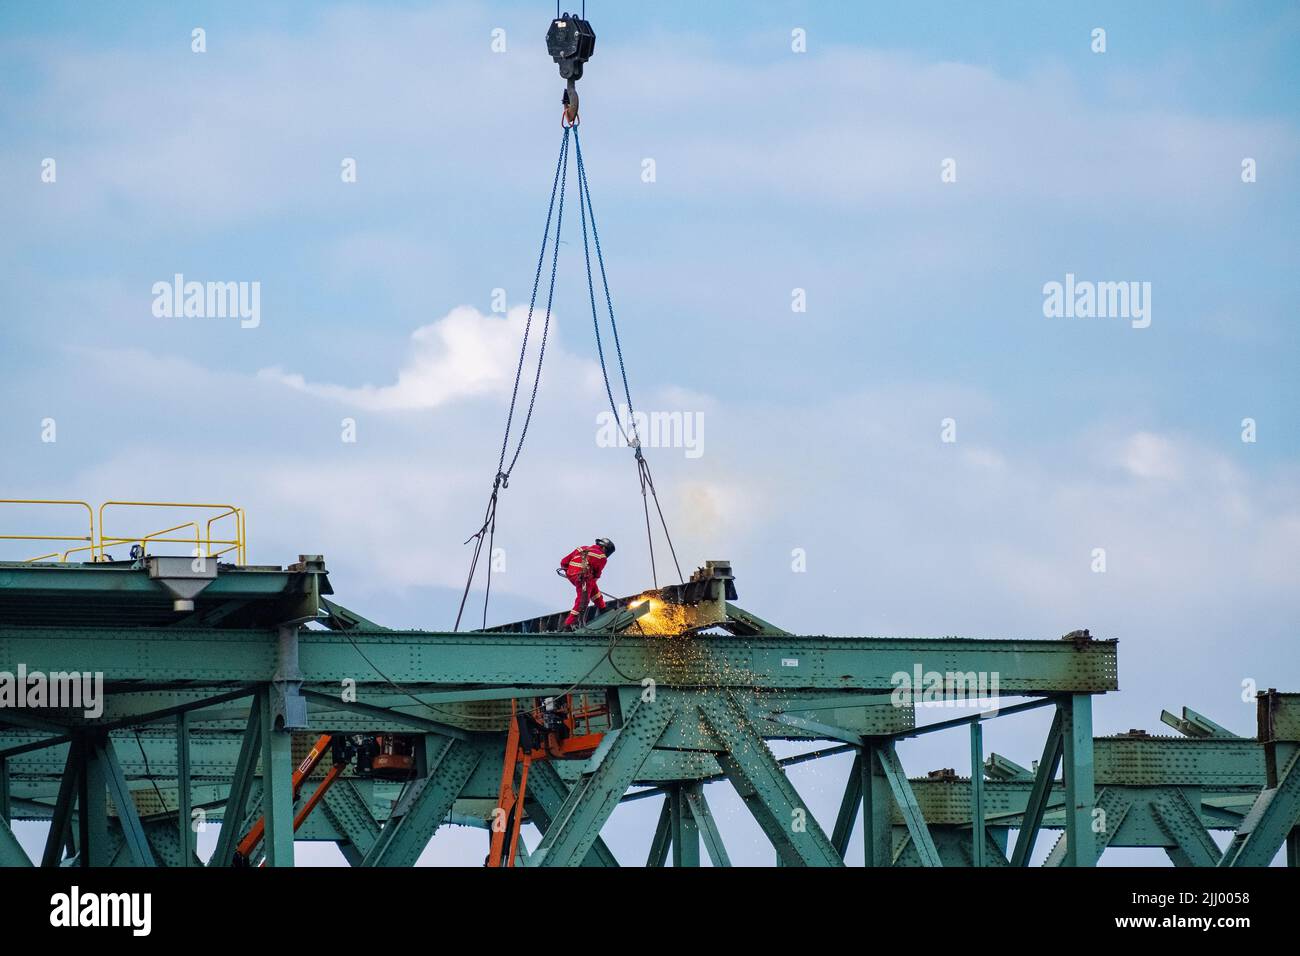 A construction welder at work on the decommissioned Champlain Bridge in Montreal, Canada. Stock Photo